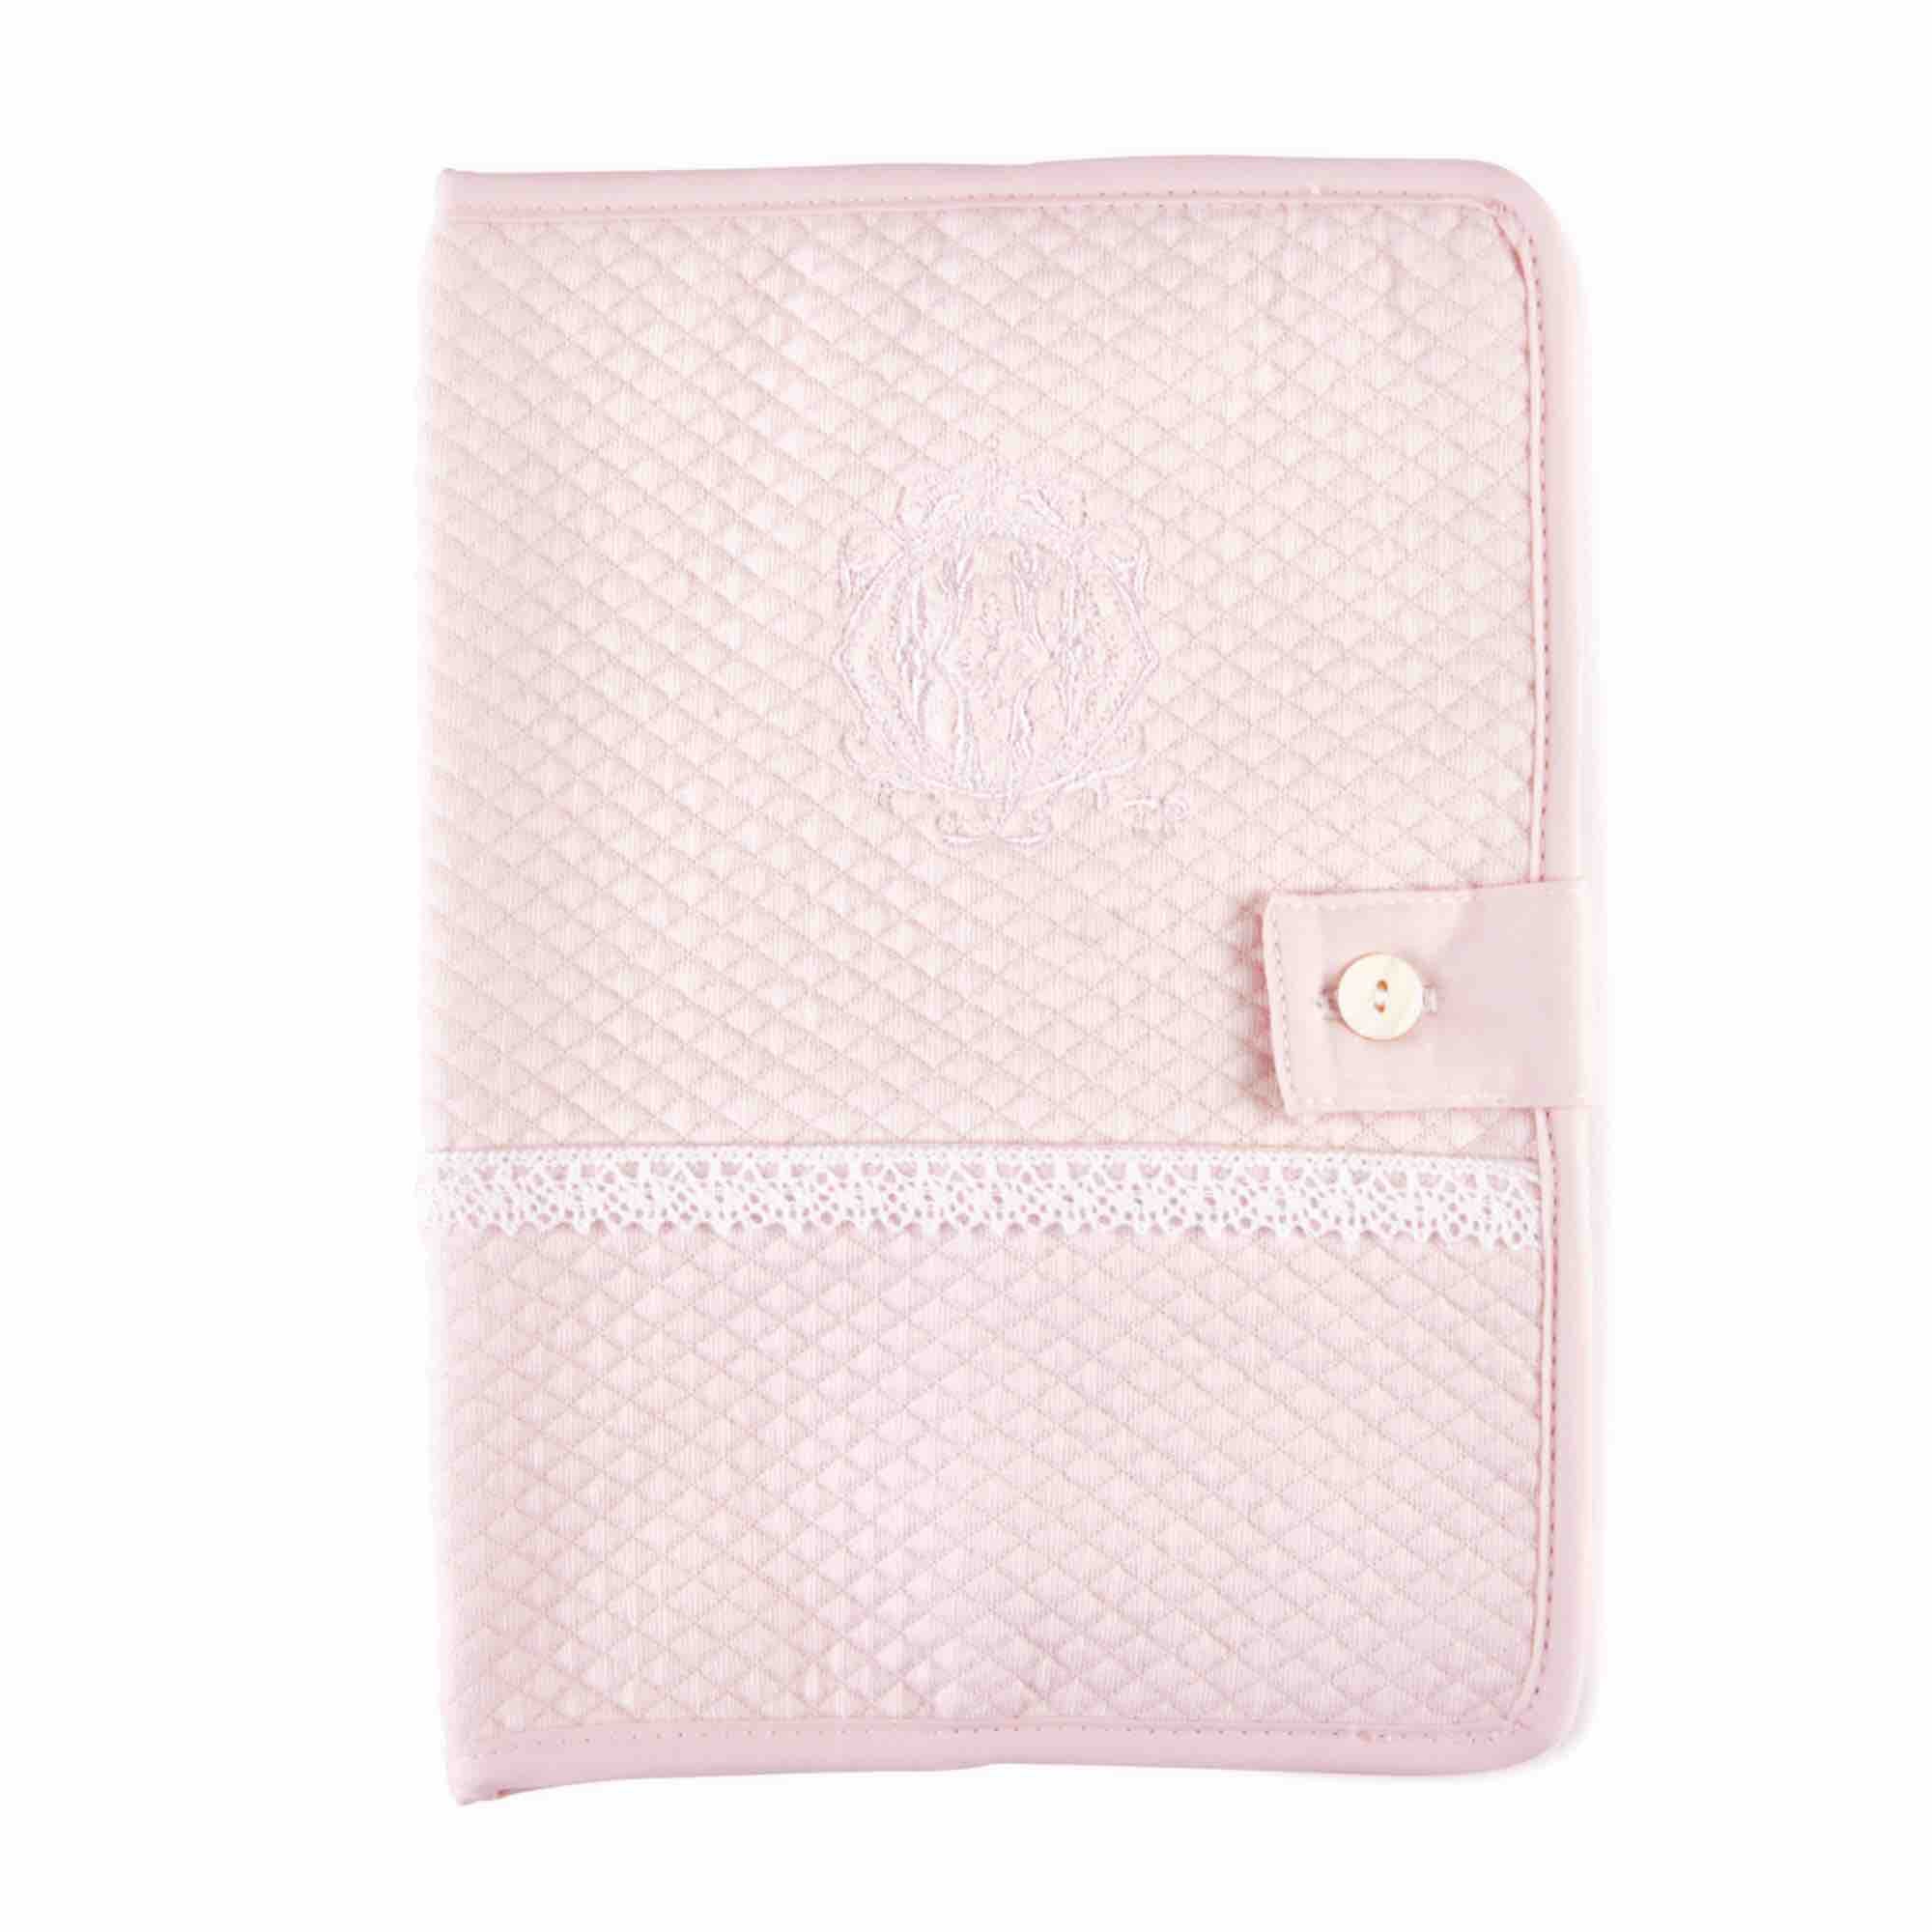 Theophile & Patachou Health Book Cover - Royal Pink